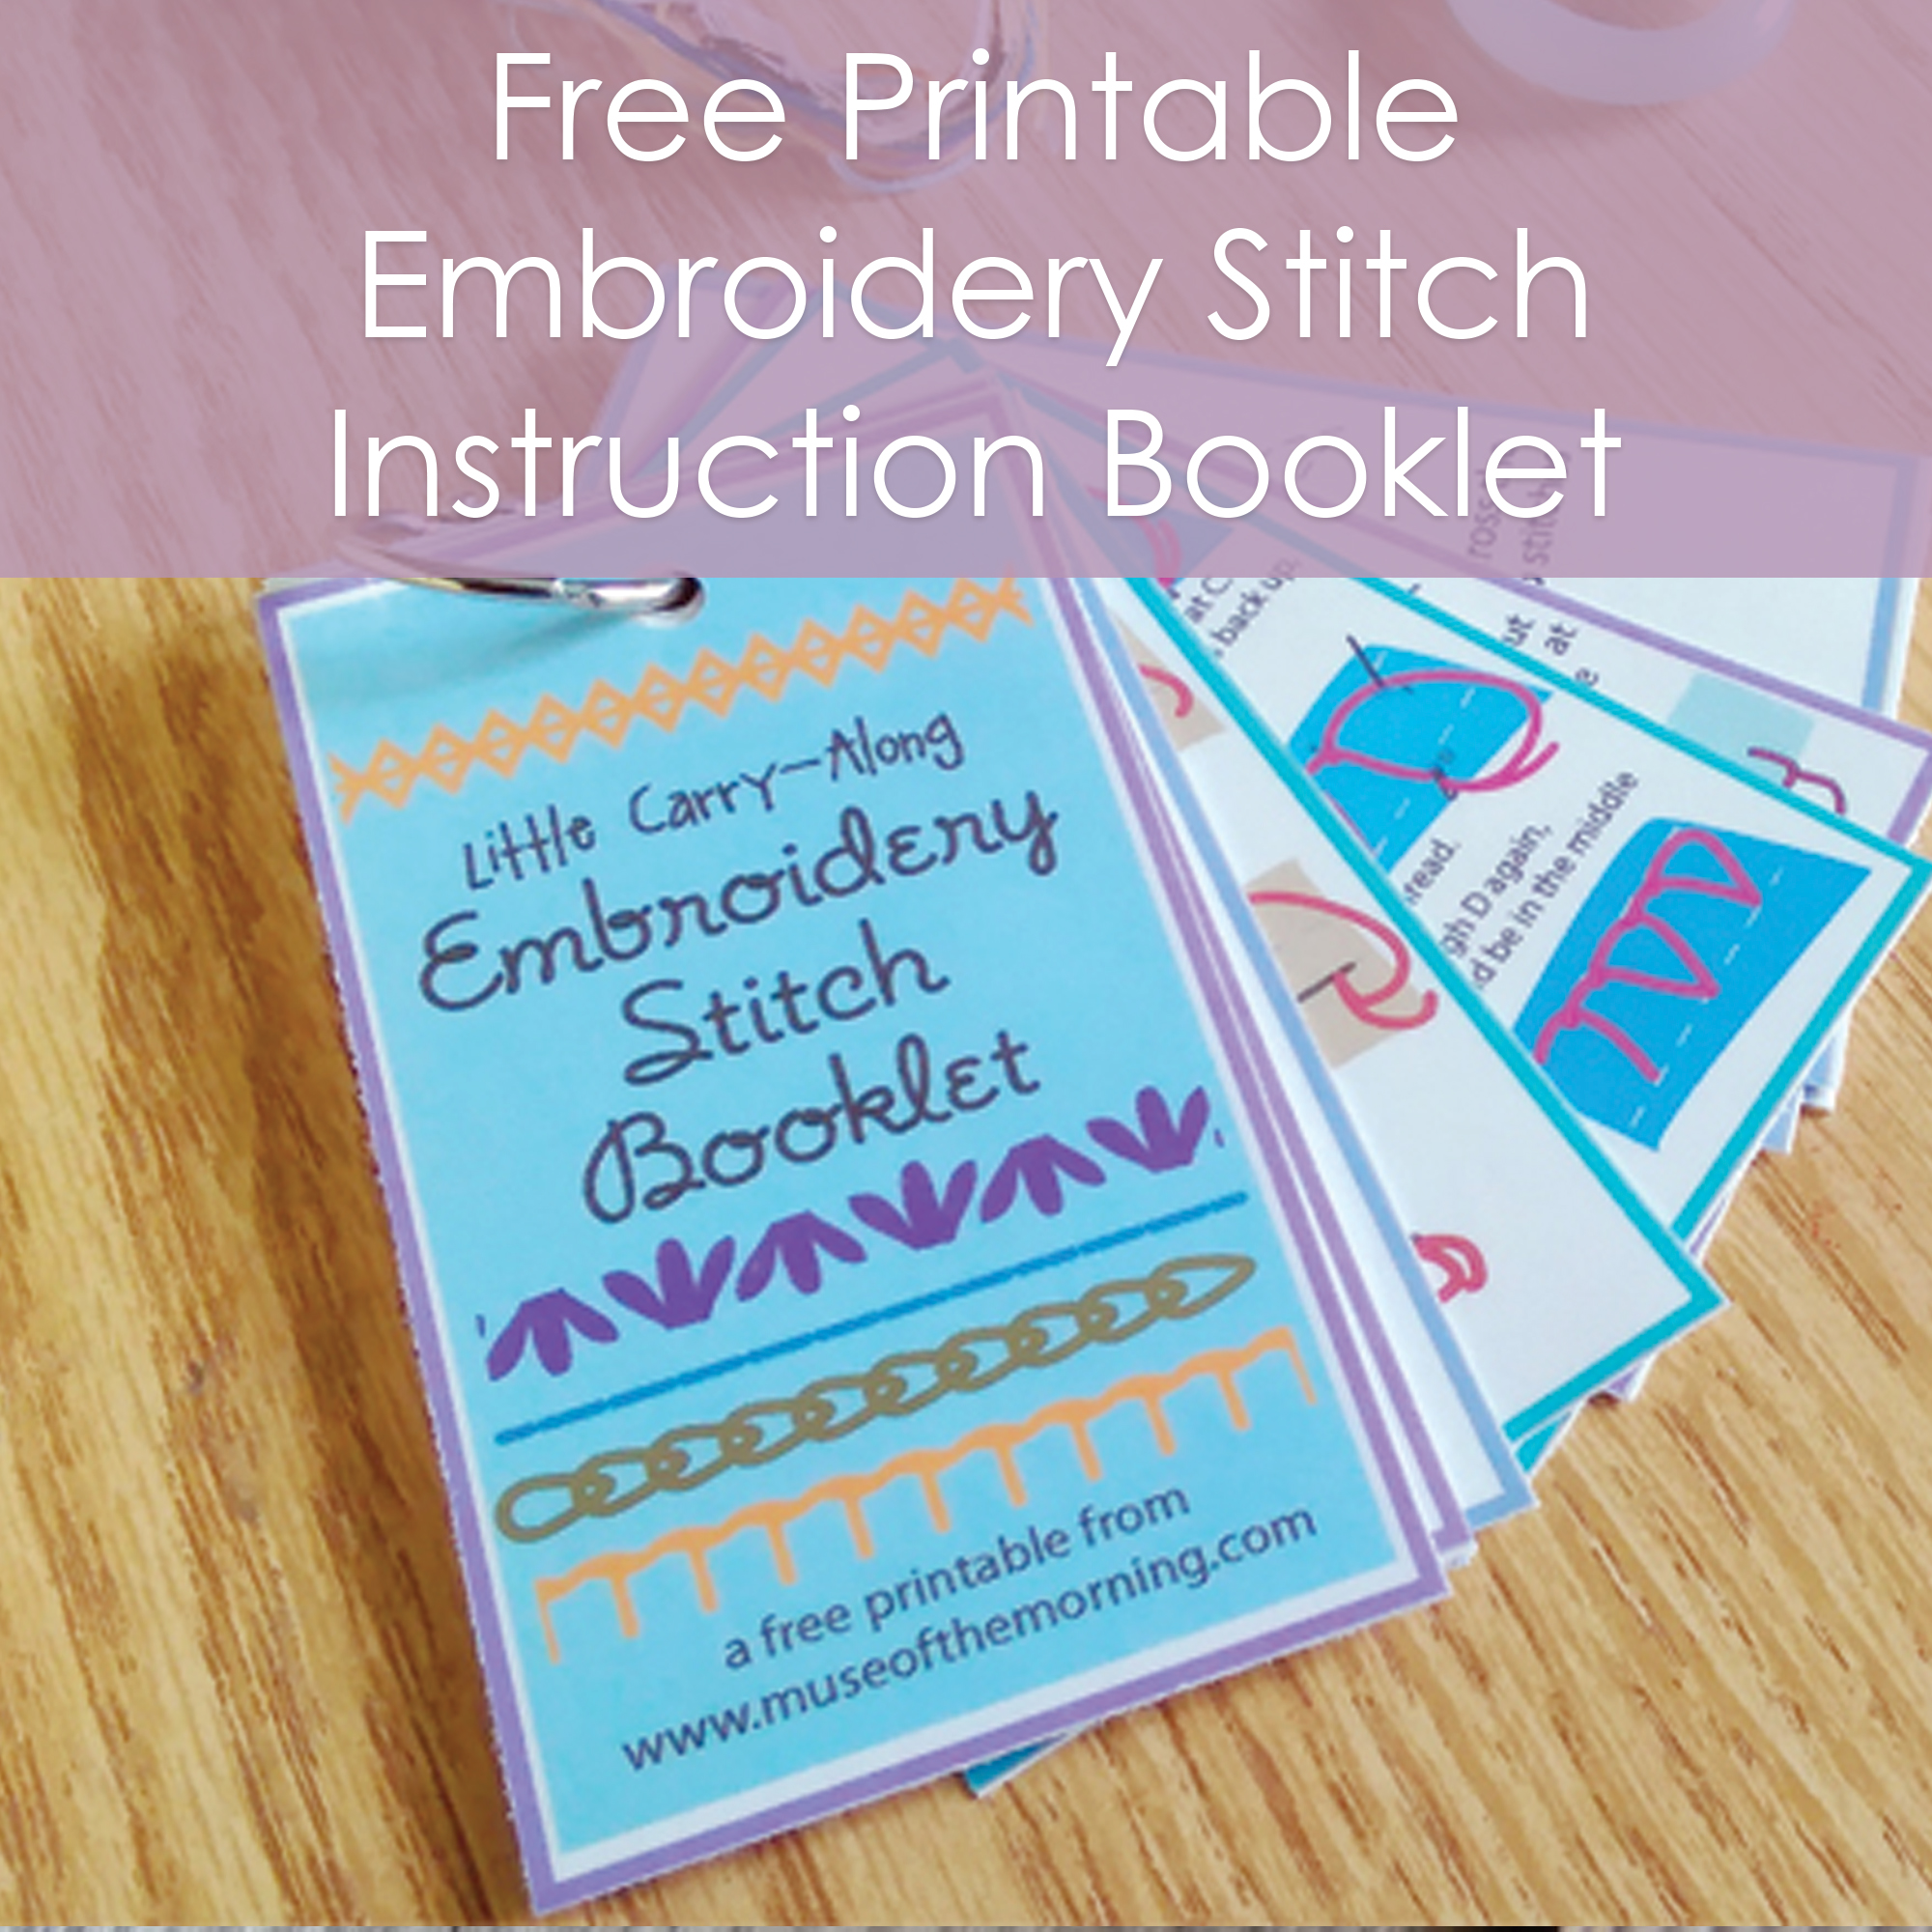 Free Printable Embroidery Stitch Instruction Booklet - from Muse of the Morning